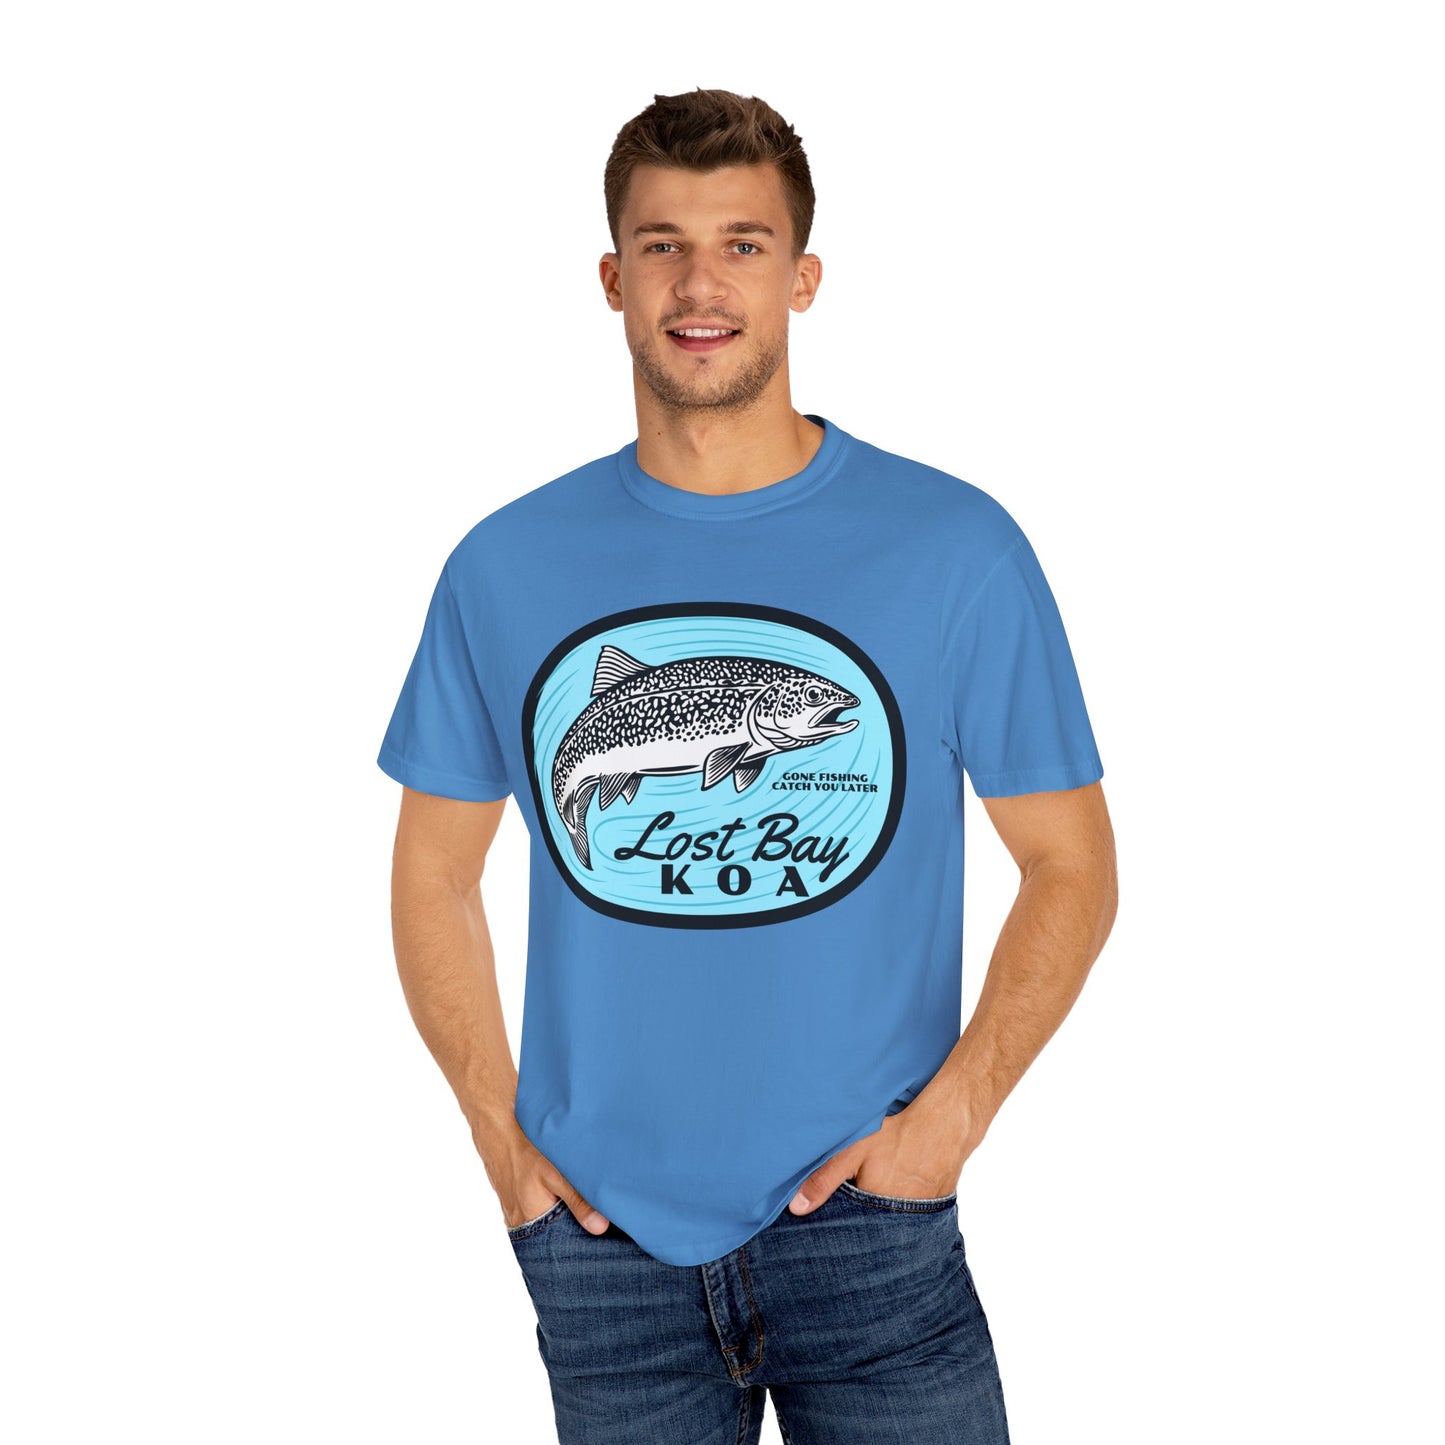 Gone Fishing, Catch You Later - Unisex Garment-Dyed T-shirt